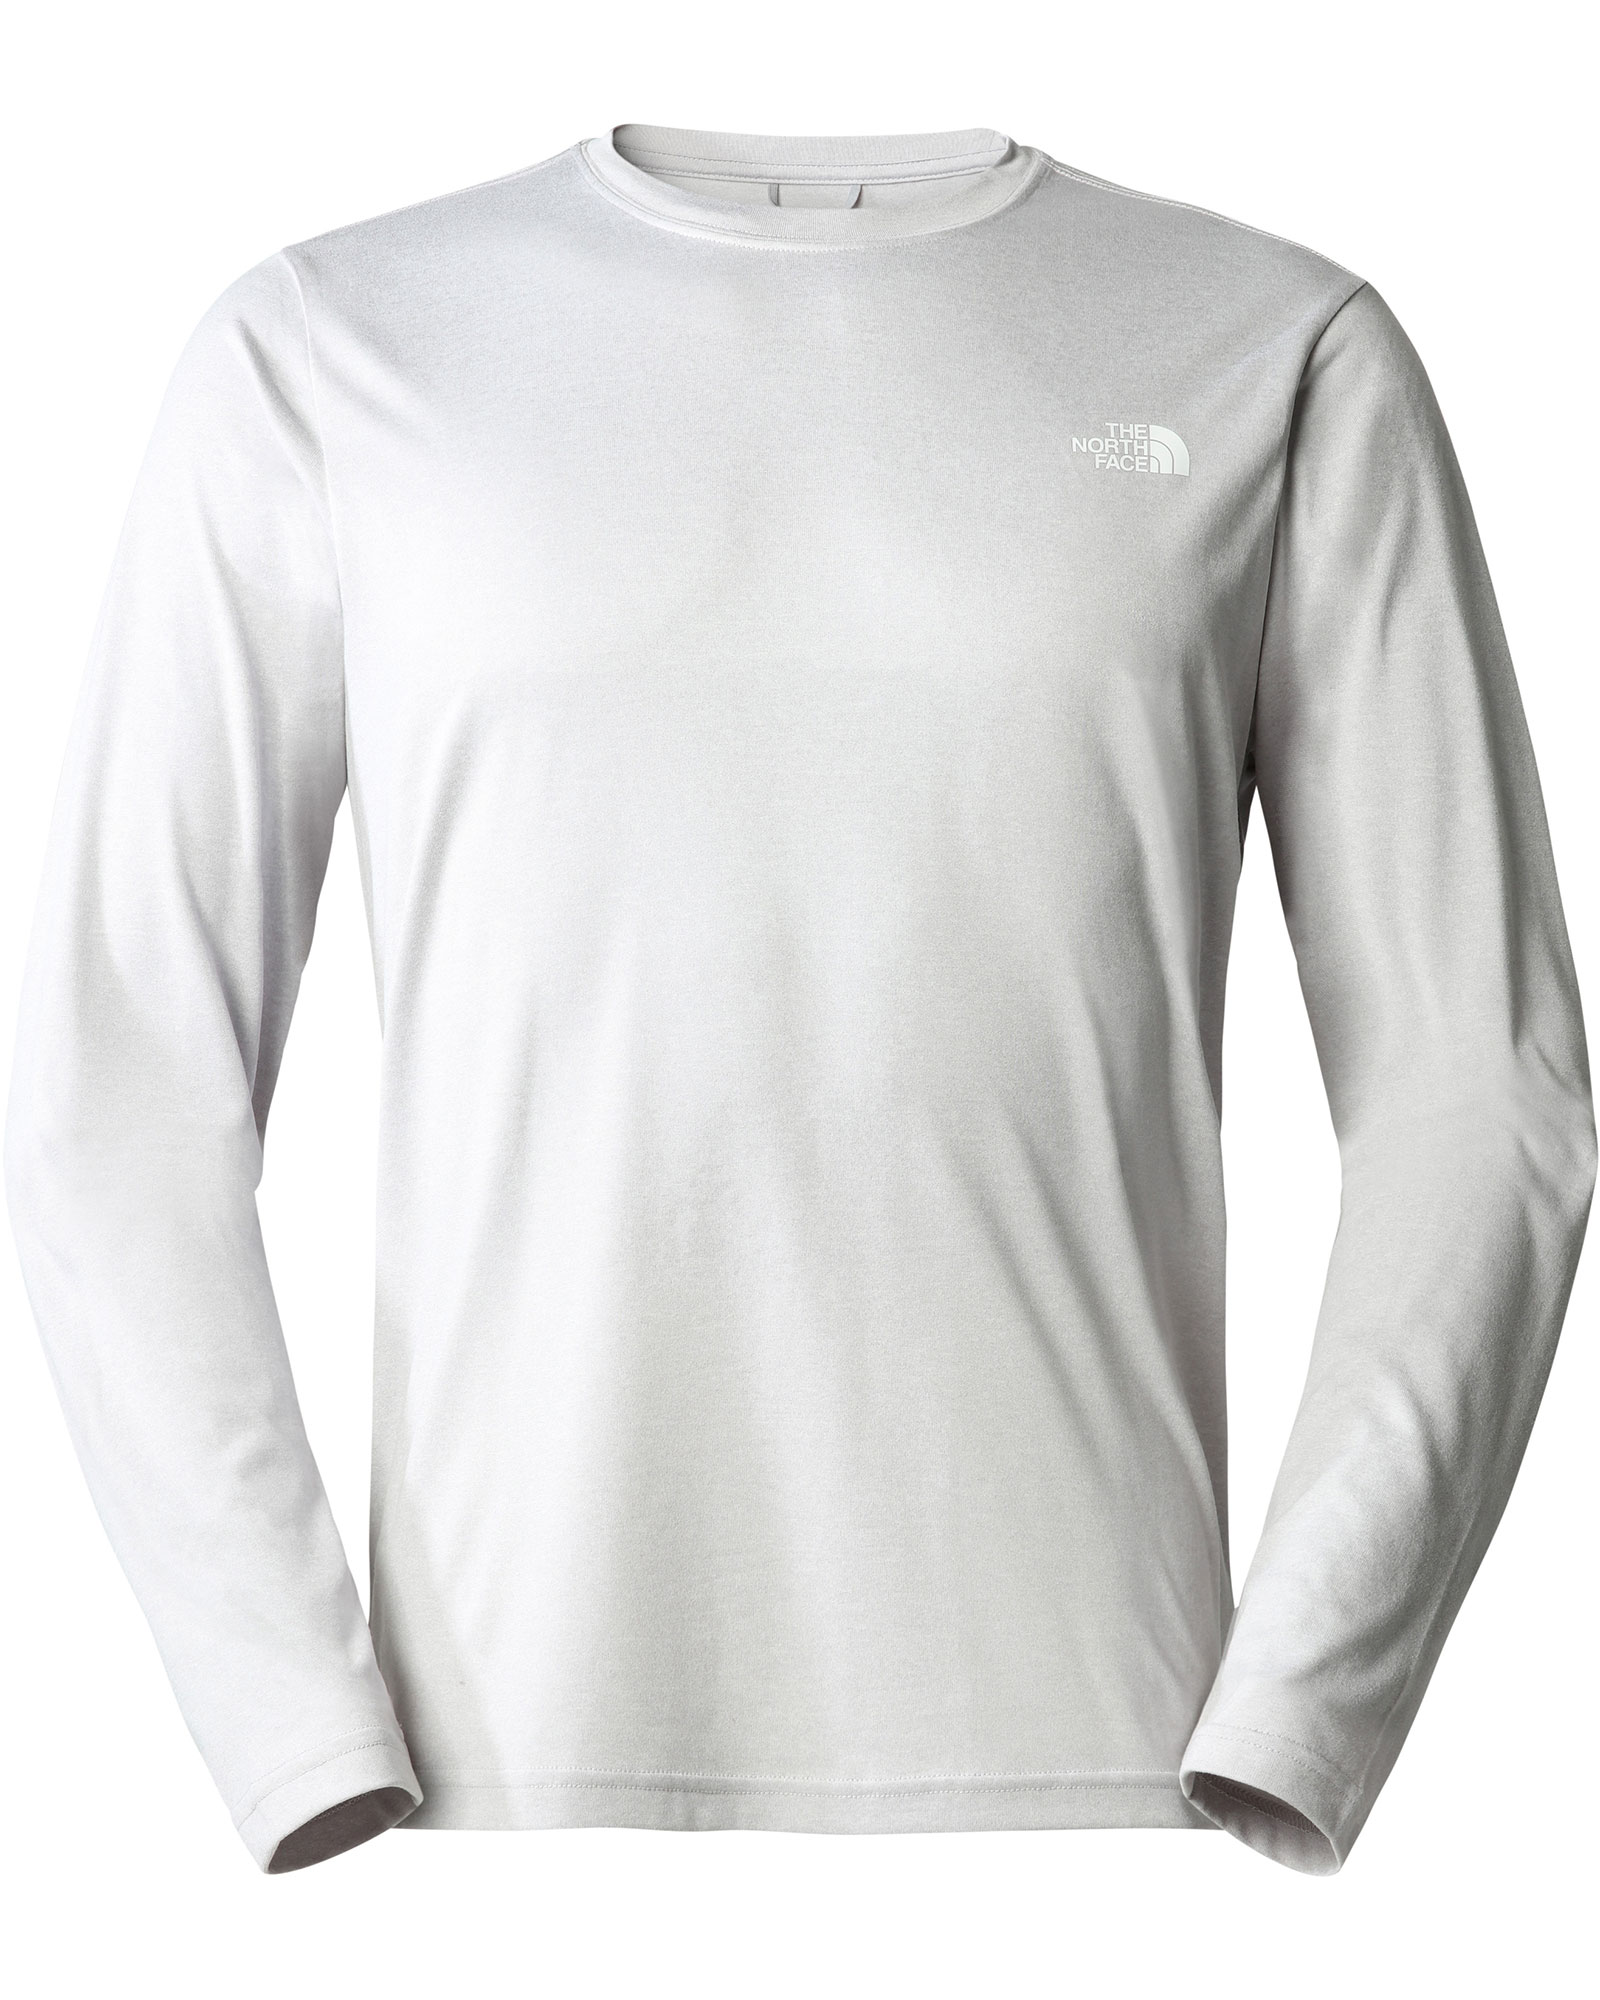 The North Face Men’s Reaxion Amp Long Sleeved Crew T Shirt - TNF Light Grey Heather XL